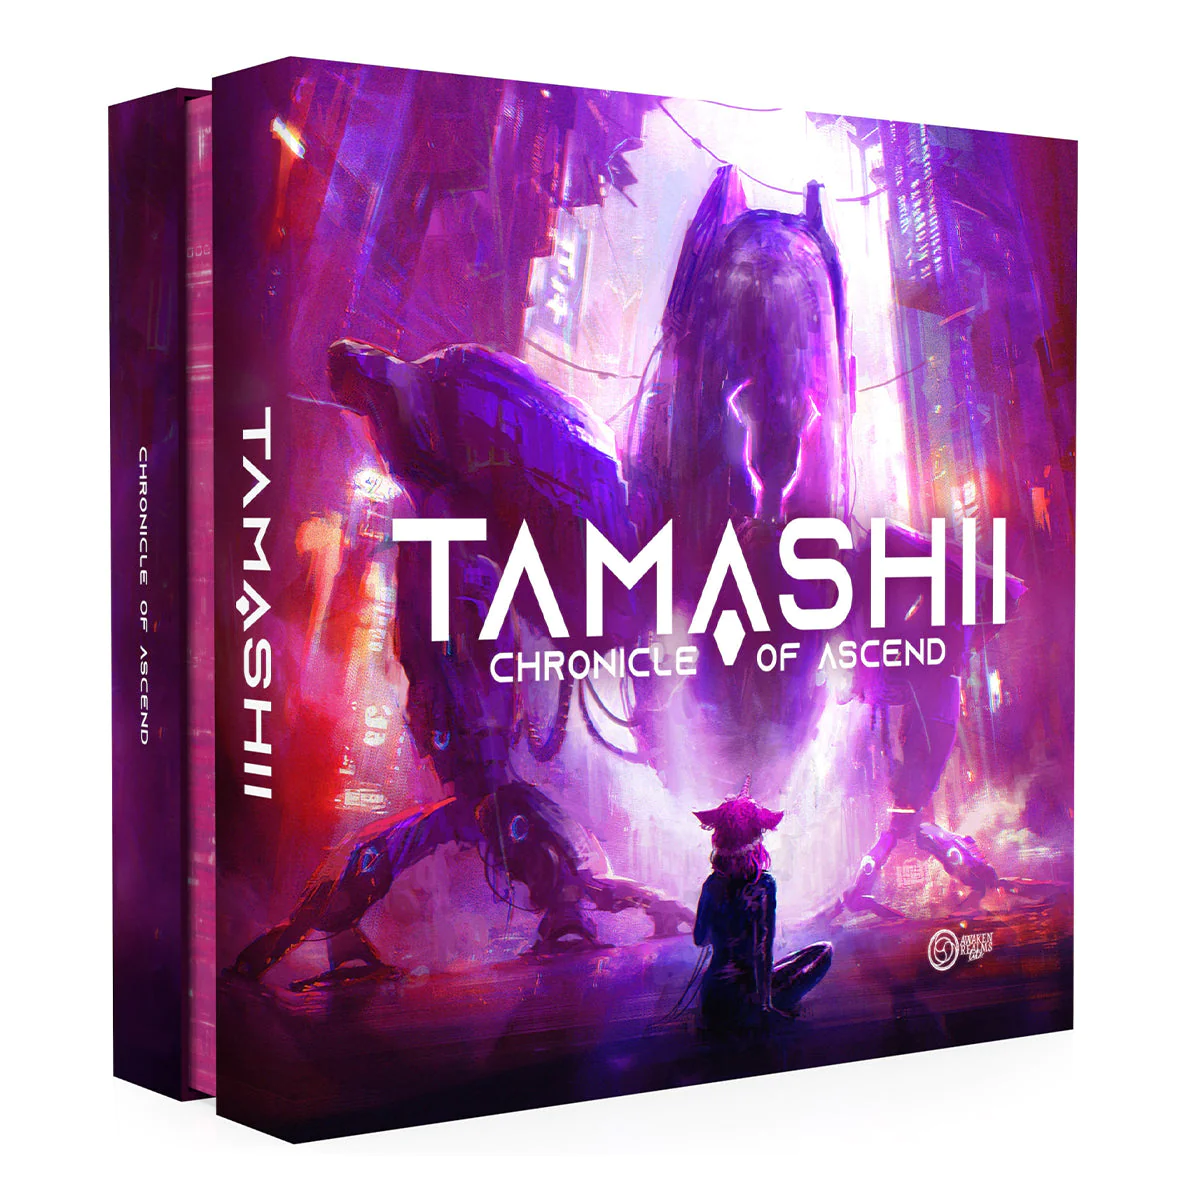 Tamashii Chronicles of Ascend Core Game + KS Stretch Goals